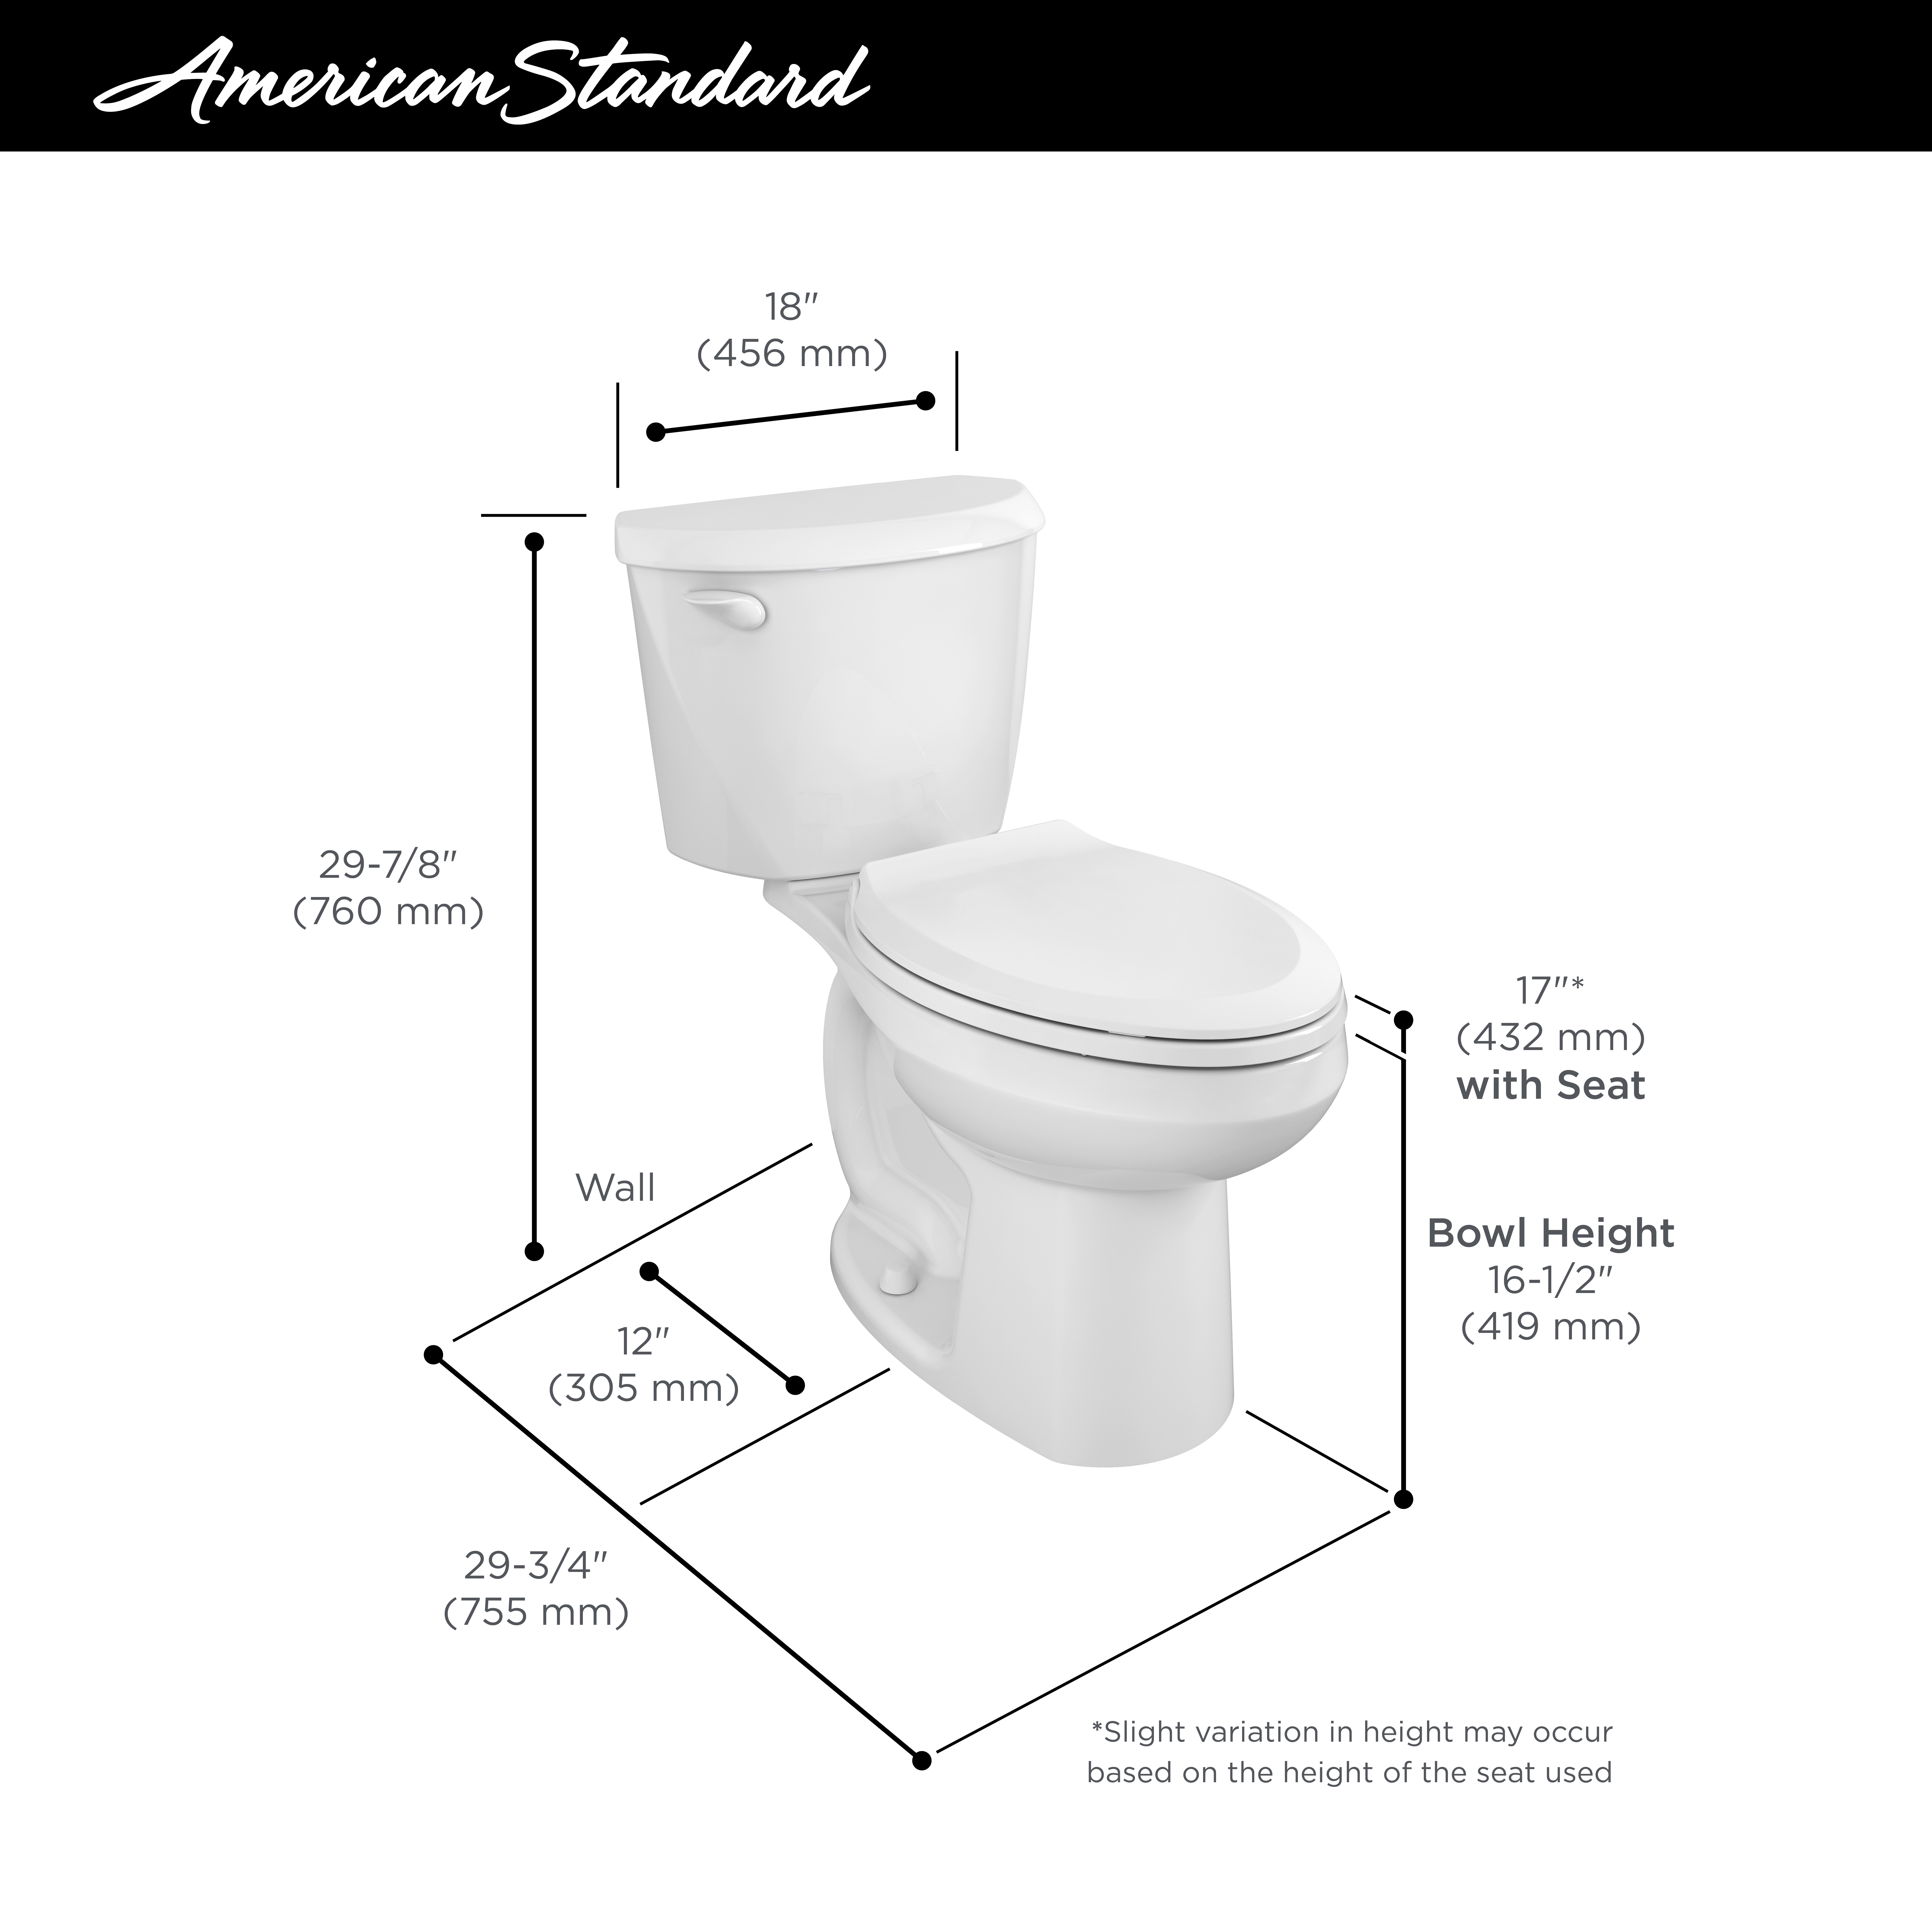 Colony® Two-Piece 1.6 gpf/6.0 Lpf Chair Height Elongated Toilet Less Seat